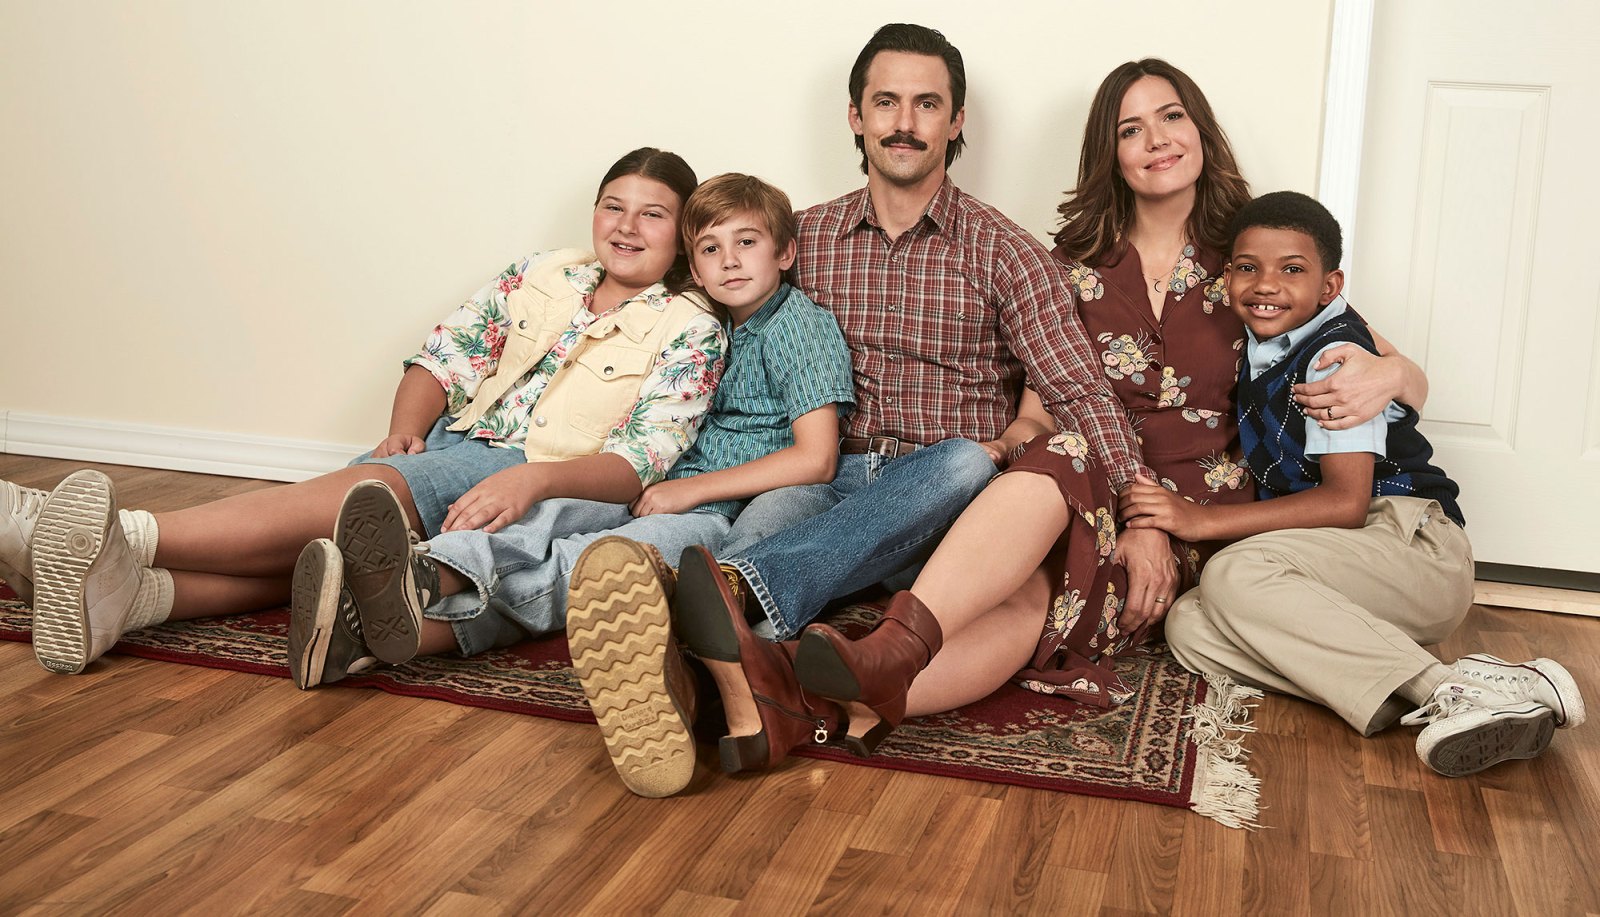 This Is Us Young And Old Flashback Mackenzie Hancsicsak as Kate, Parker Bates as Kevin, Milo Ventimiglia as Jack, Mandy Moore as Rebecca, Lonnie Chavis as Randall